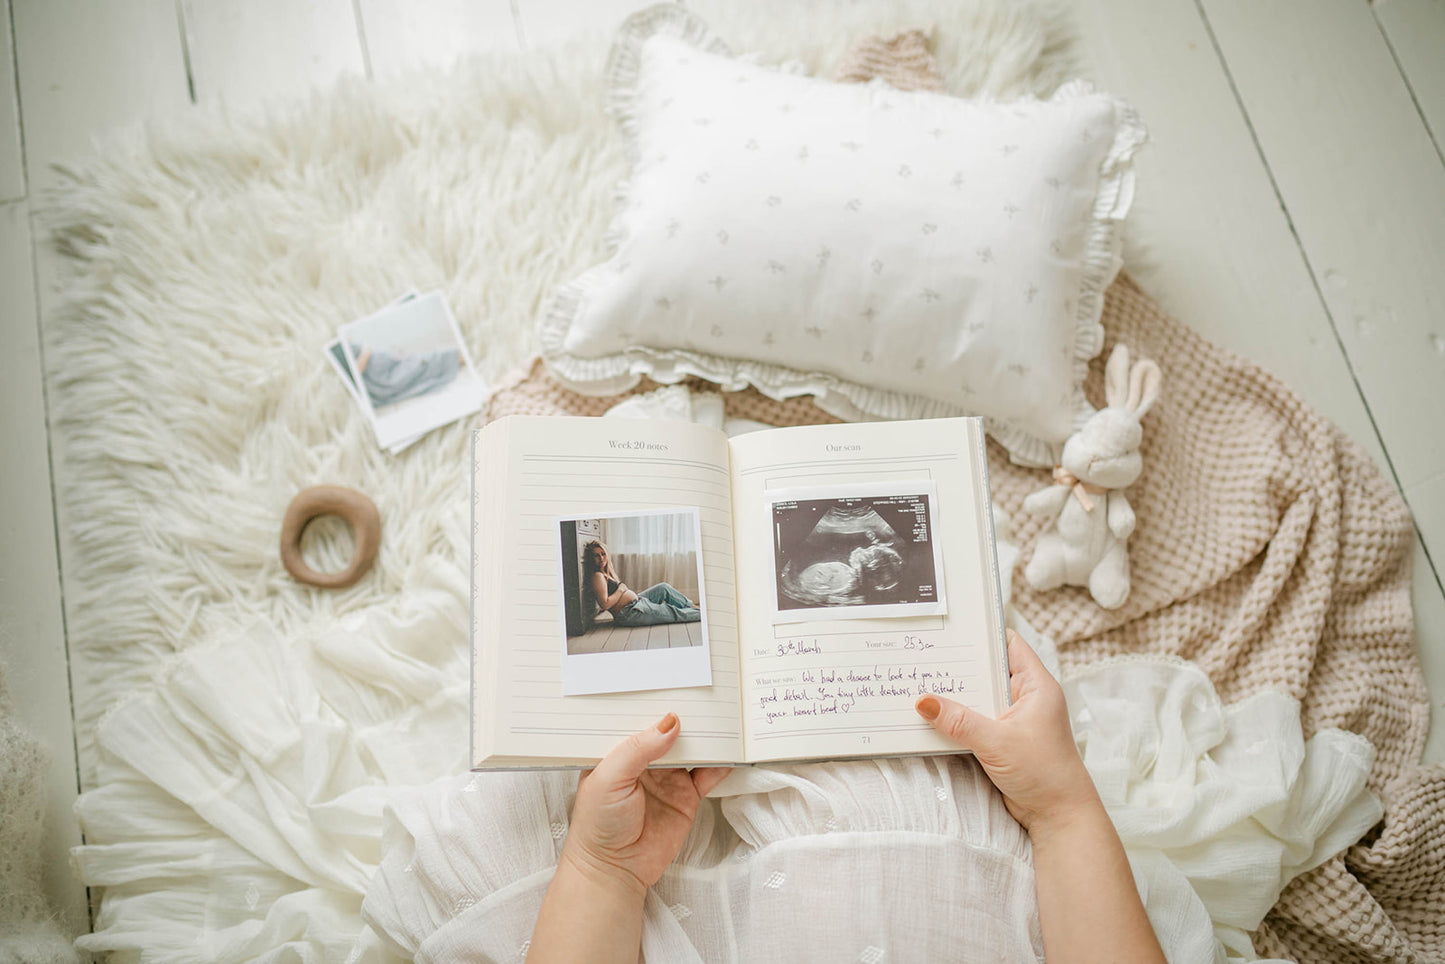 my pregnancy story in grey, a memory book for your pregnancy journey